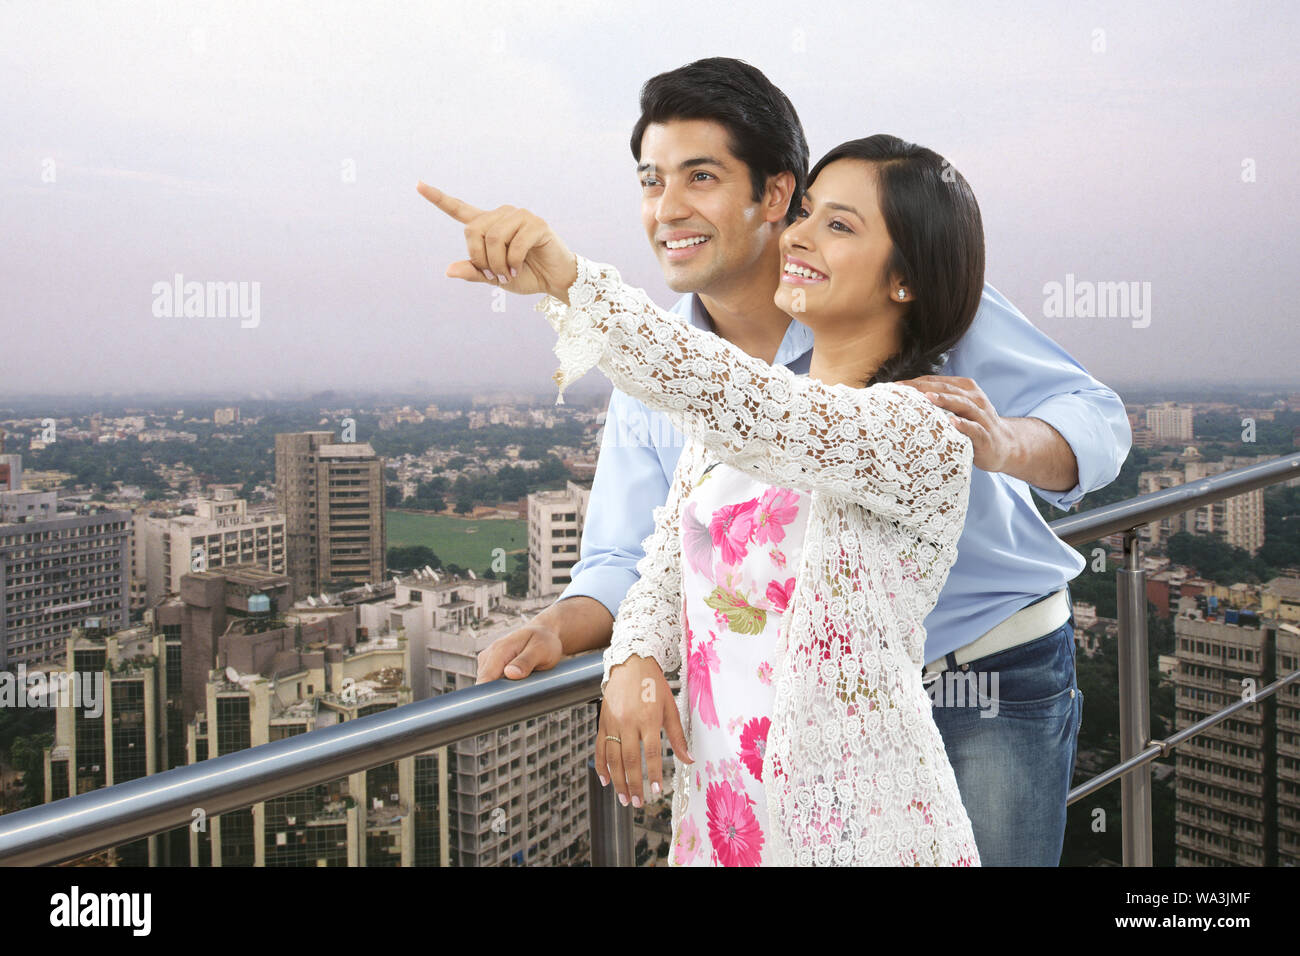 Young woman standing in a balcony and showing something to her husband Stock Photo